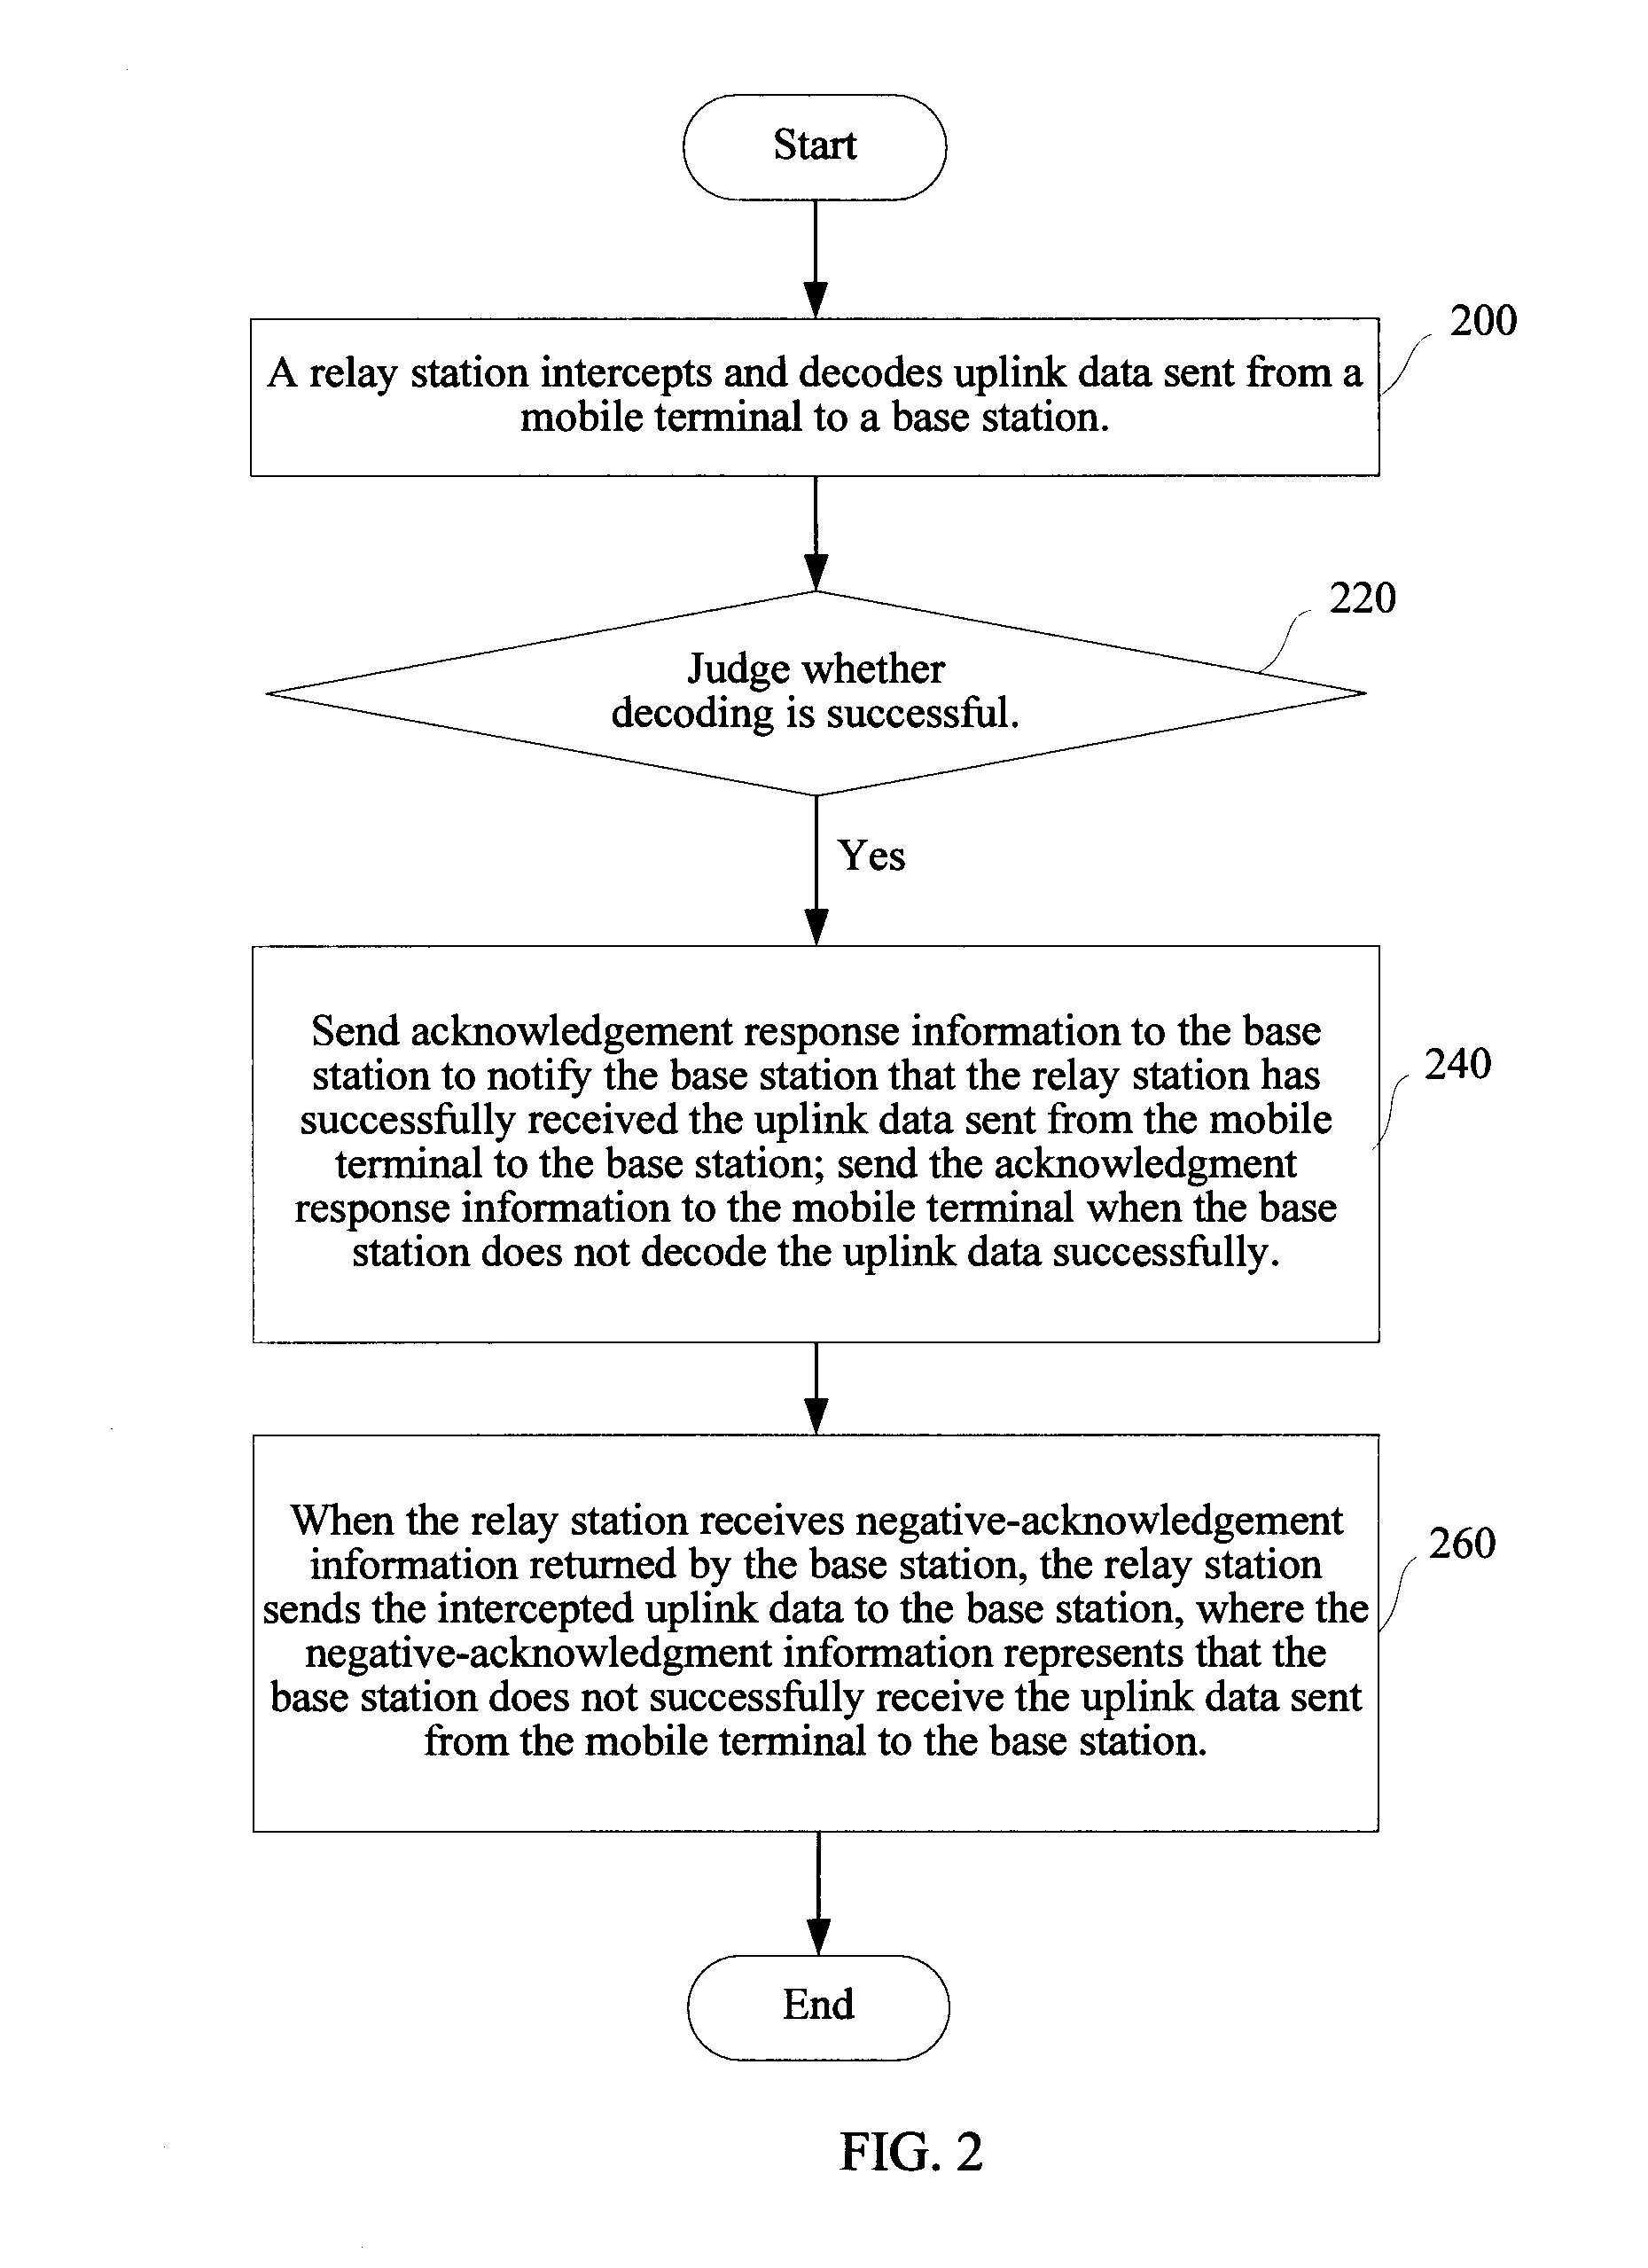 Uplink hybrid automatic repeat request method and device in a transparent relay network